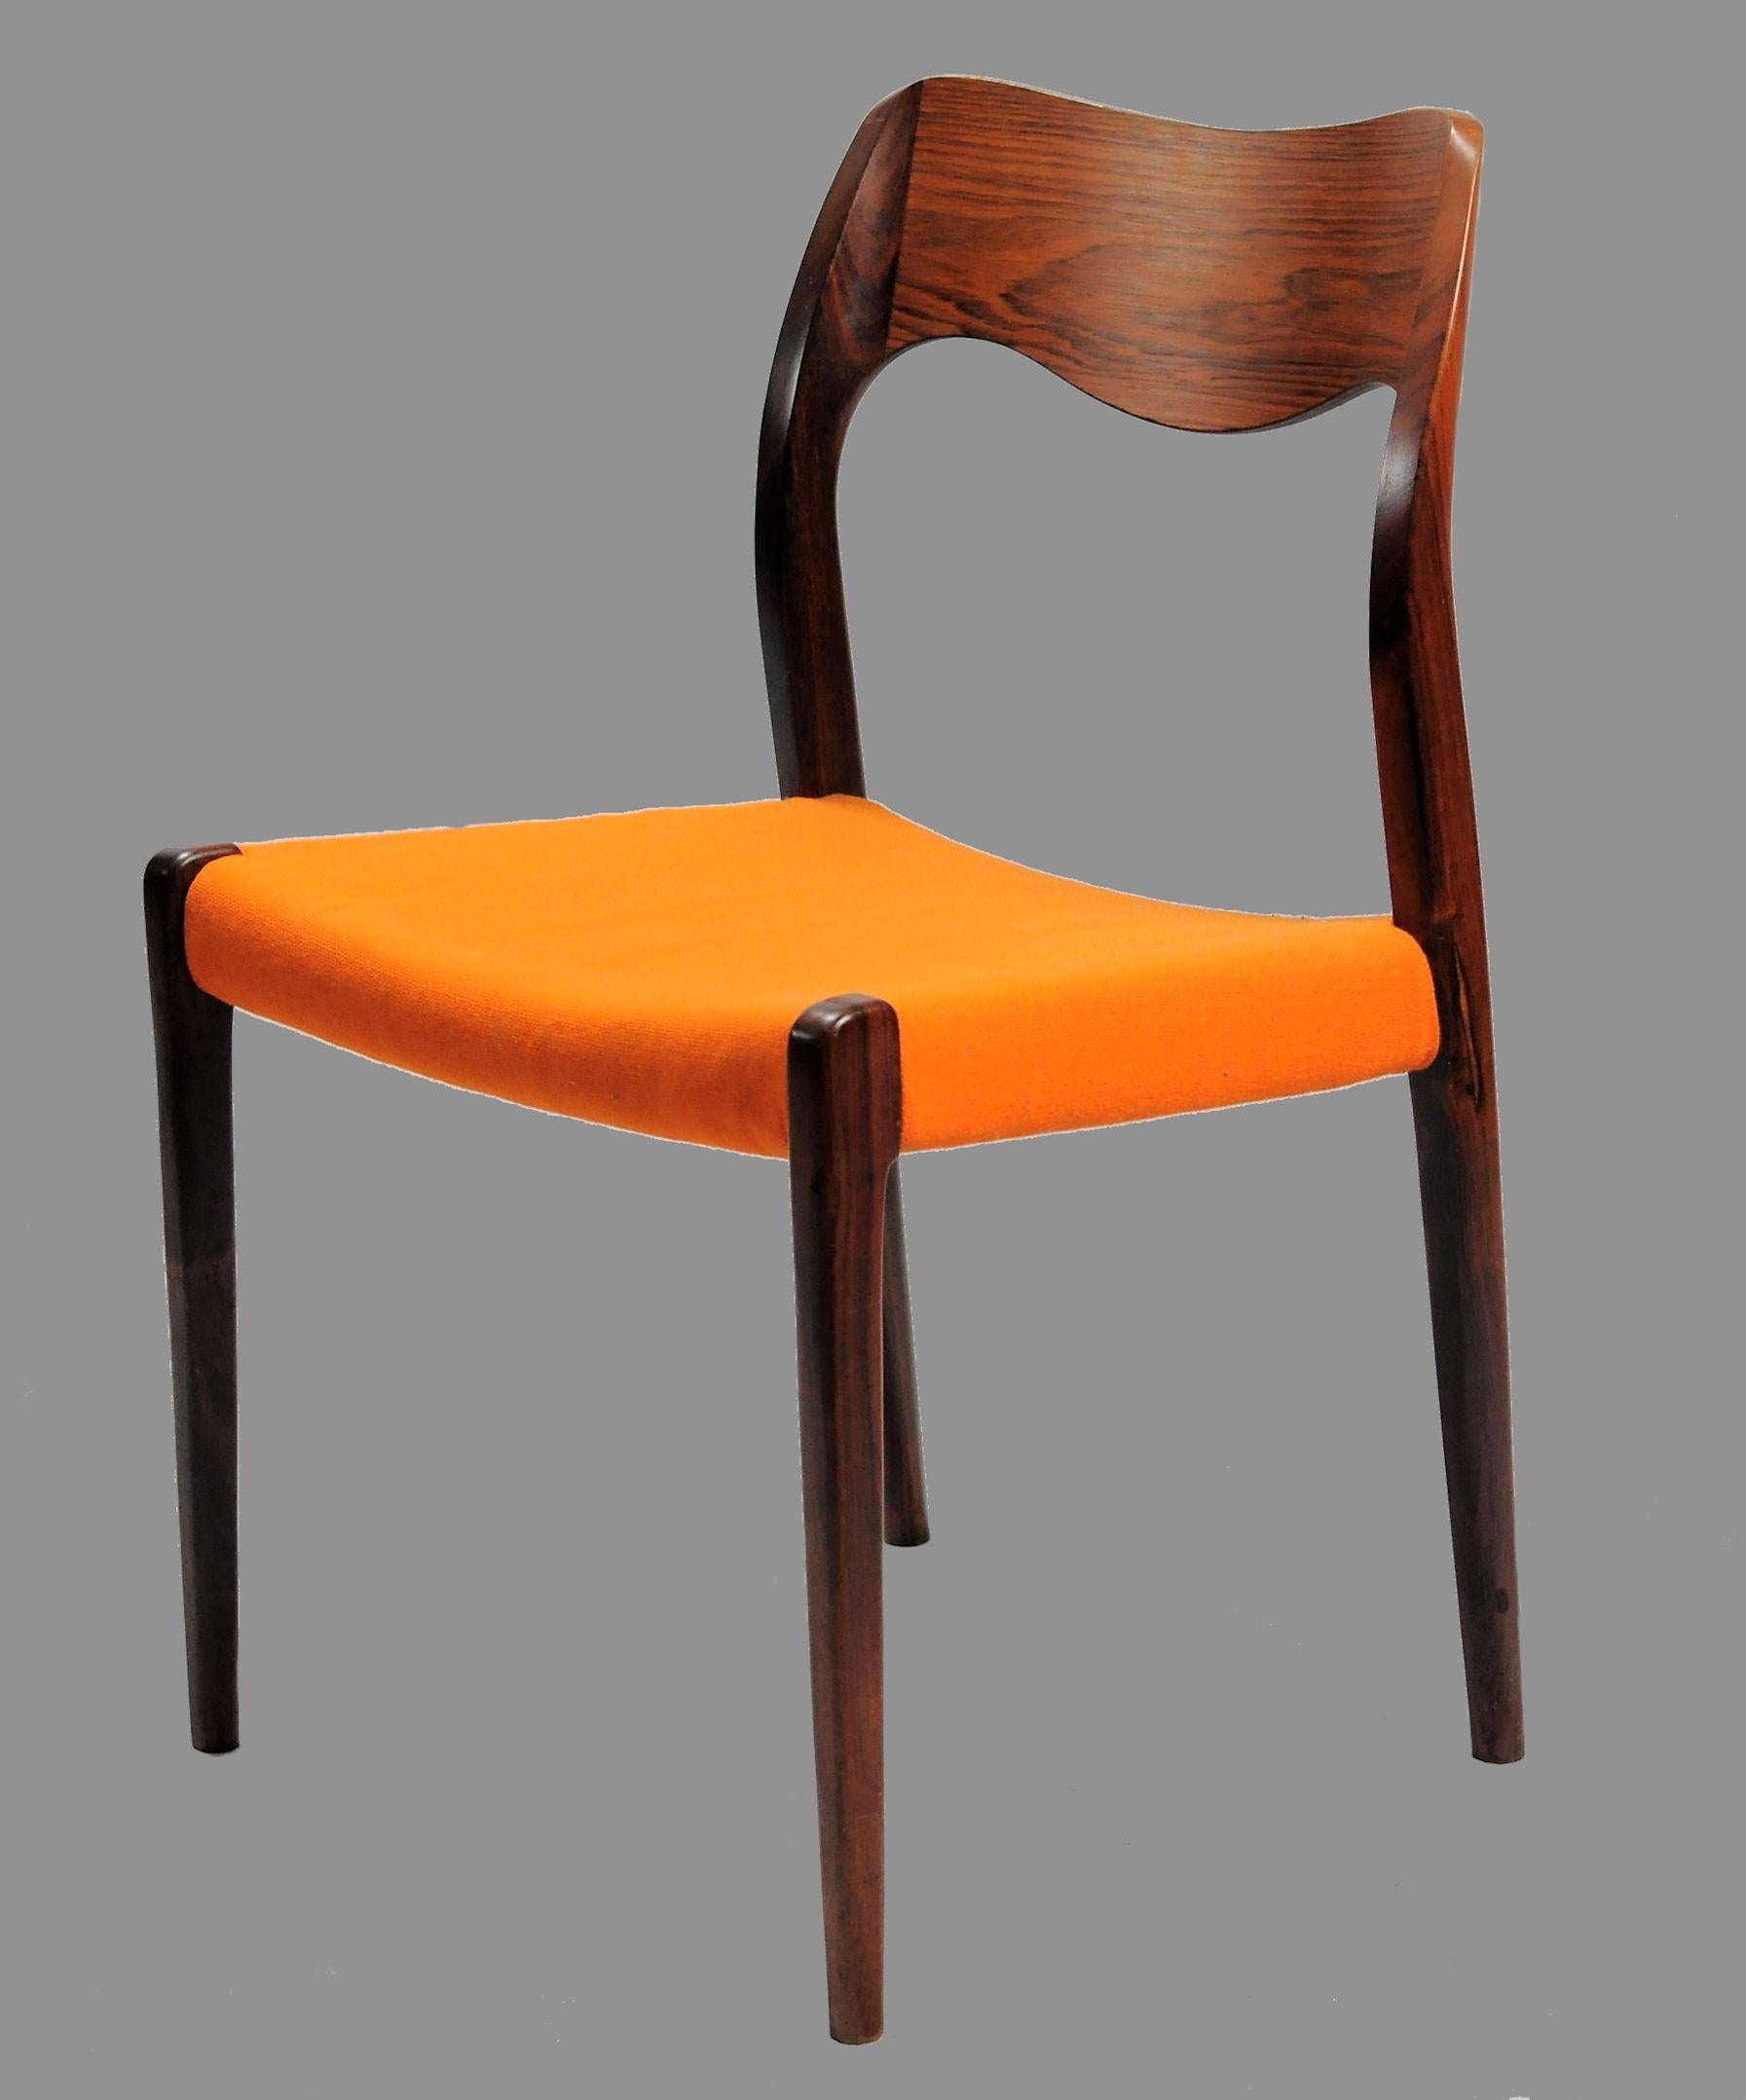 Set of 12 model 71 rosewood dining chairs designed by Niels Otto Møller in 1951.

The chairs feature a solid frame and backrest in rosewood designed with straight lined legs and an elegant organic shaped backrest with the soft lines and curves